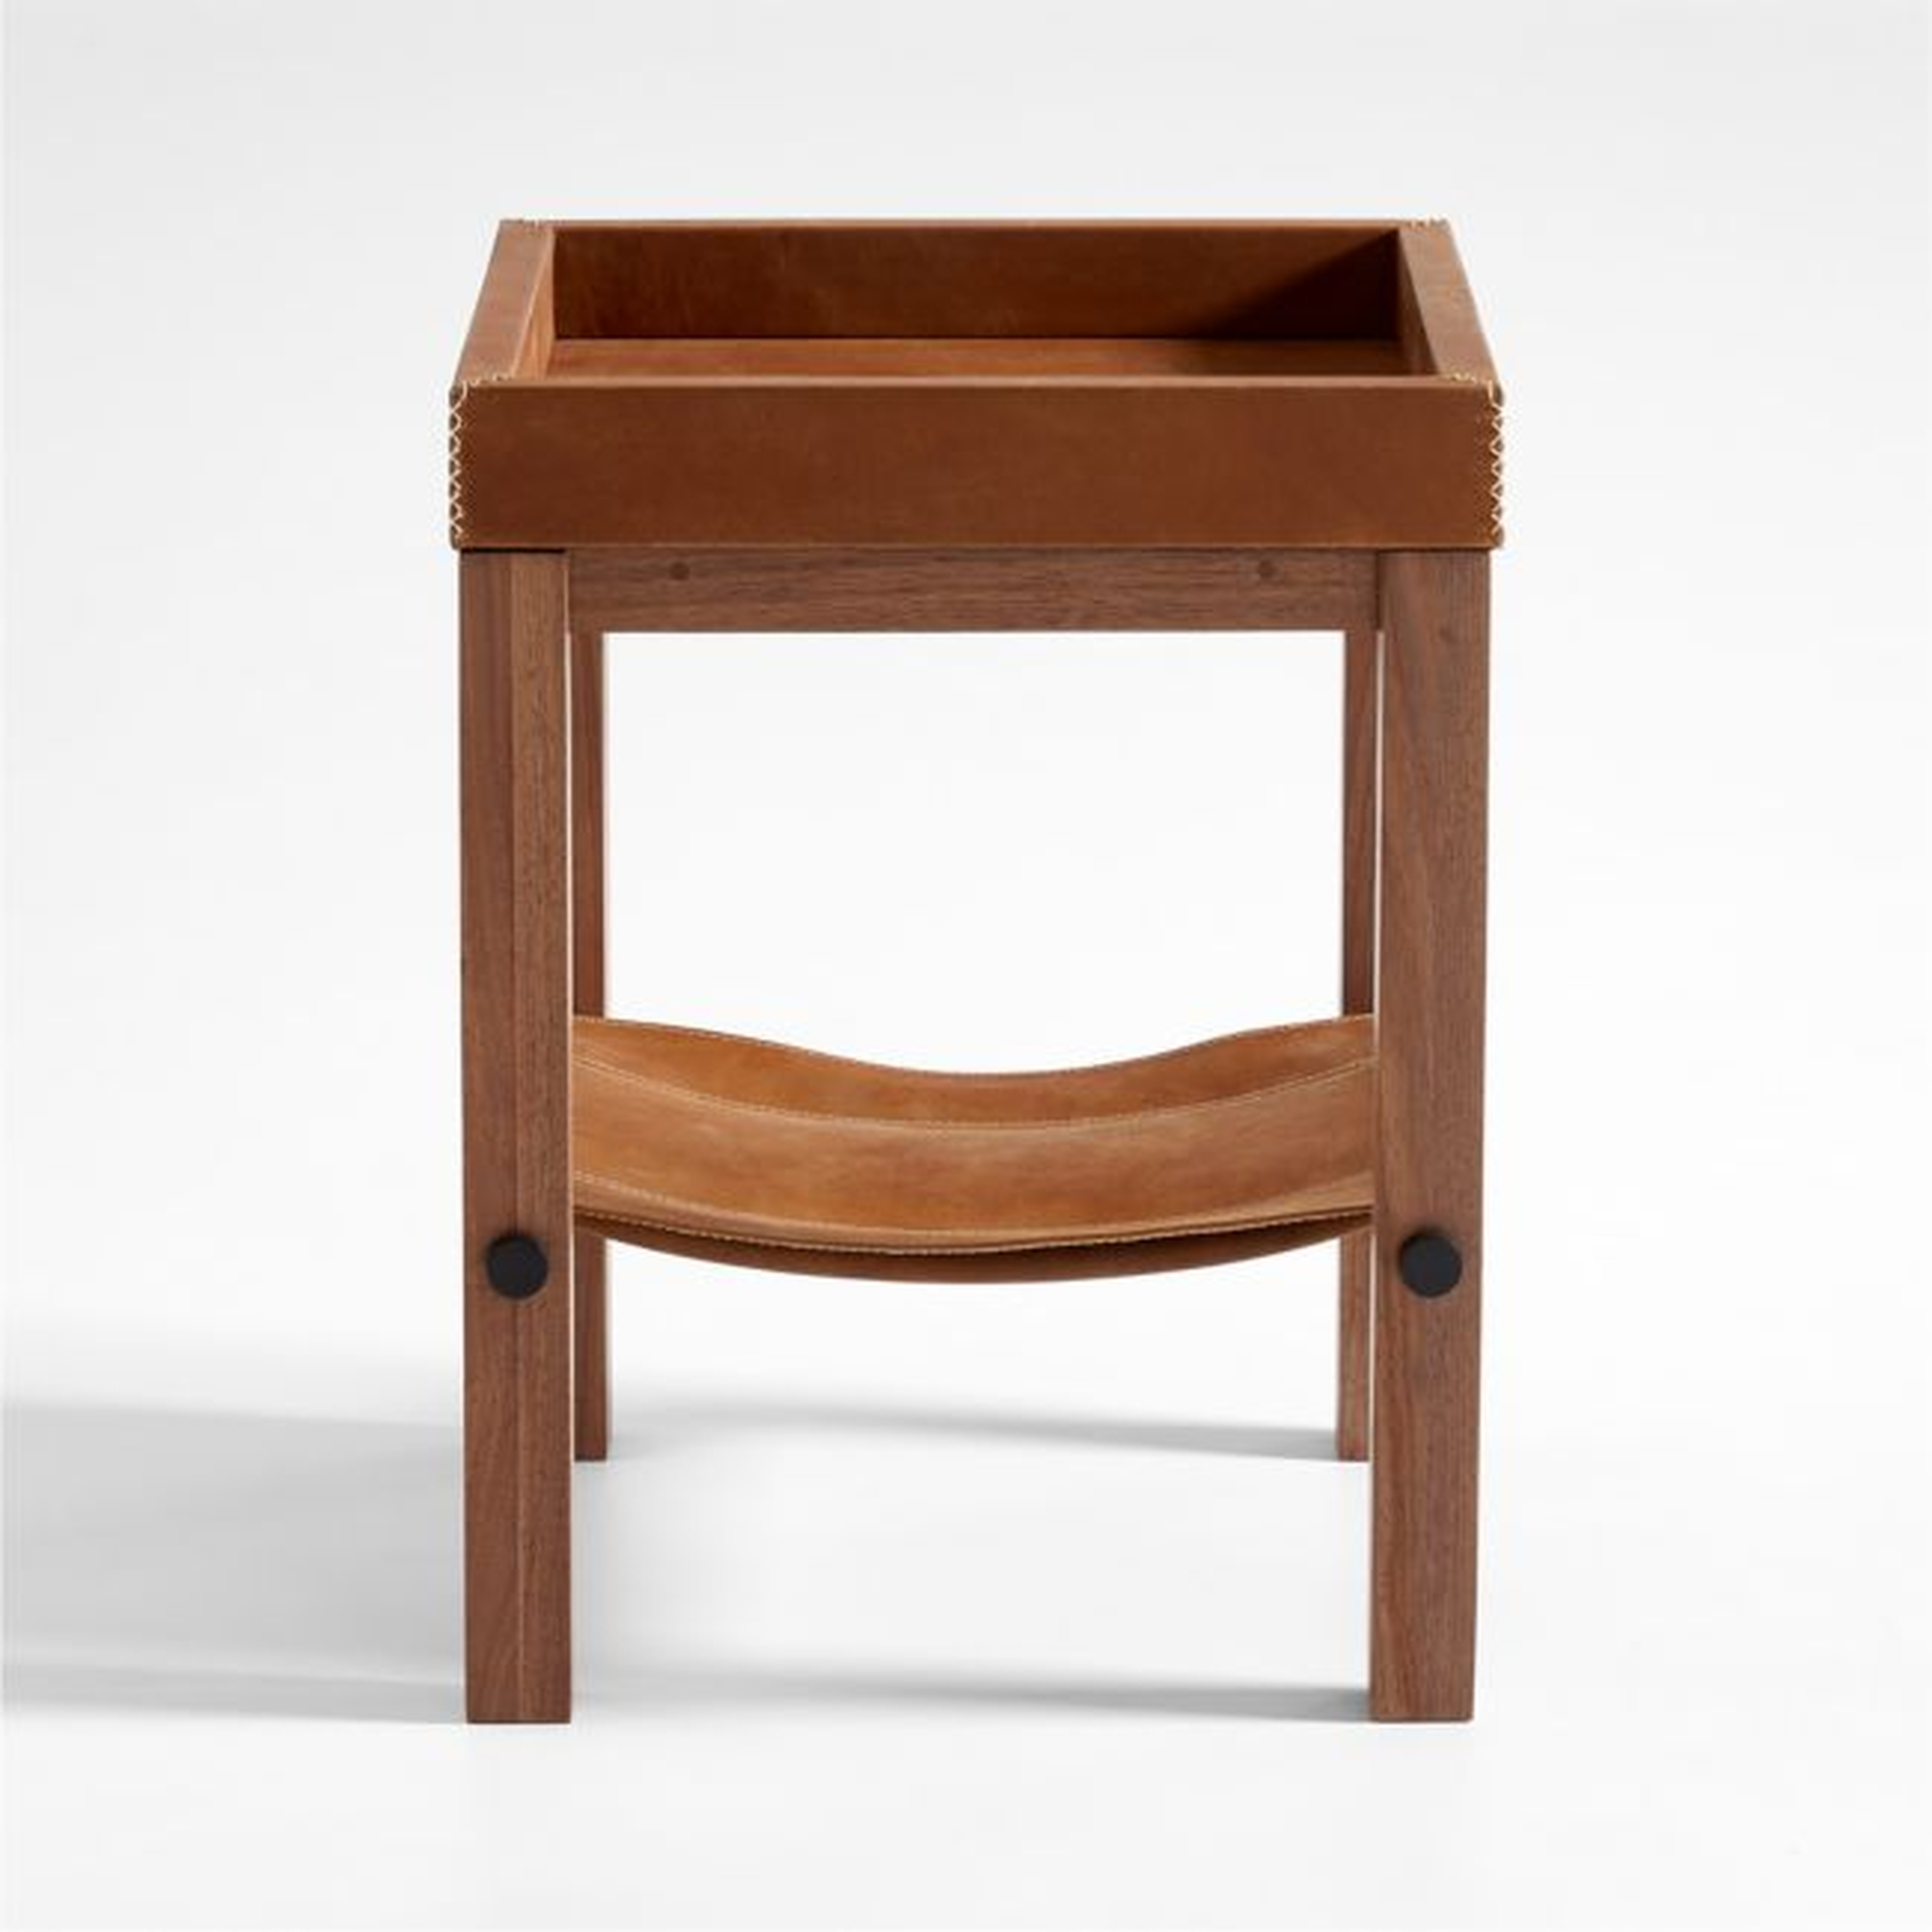 Shinola Runwell Leather and Wood End Table with Shelf - Crate and Barrel